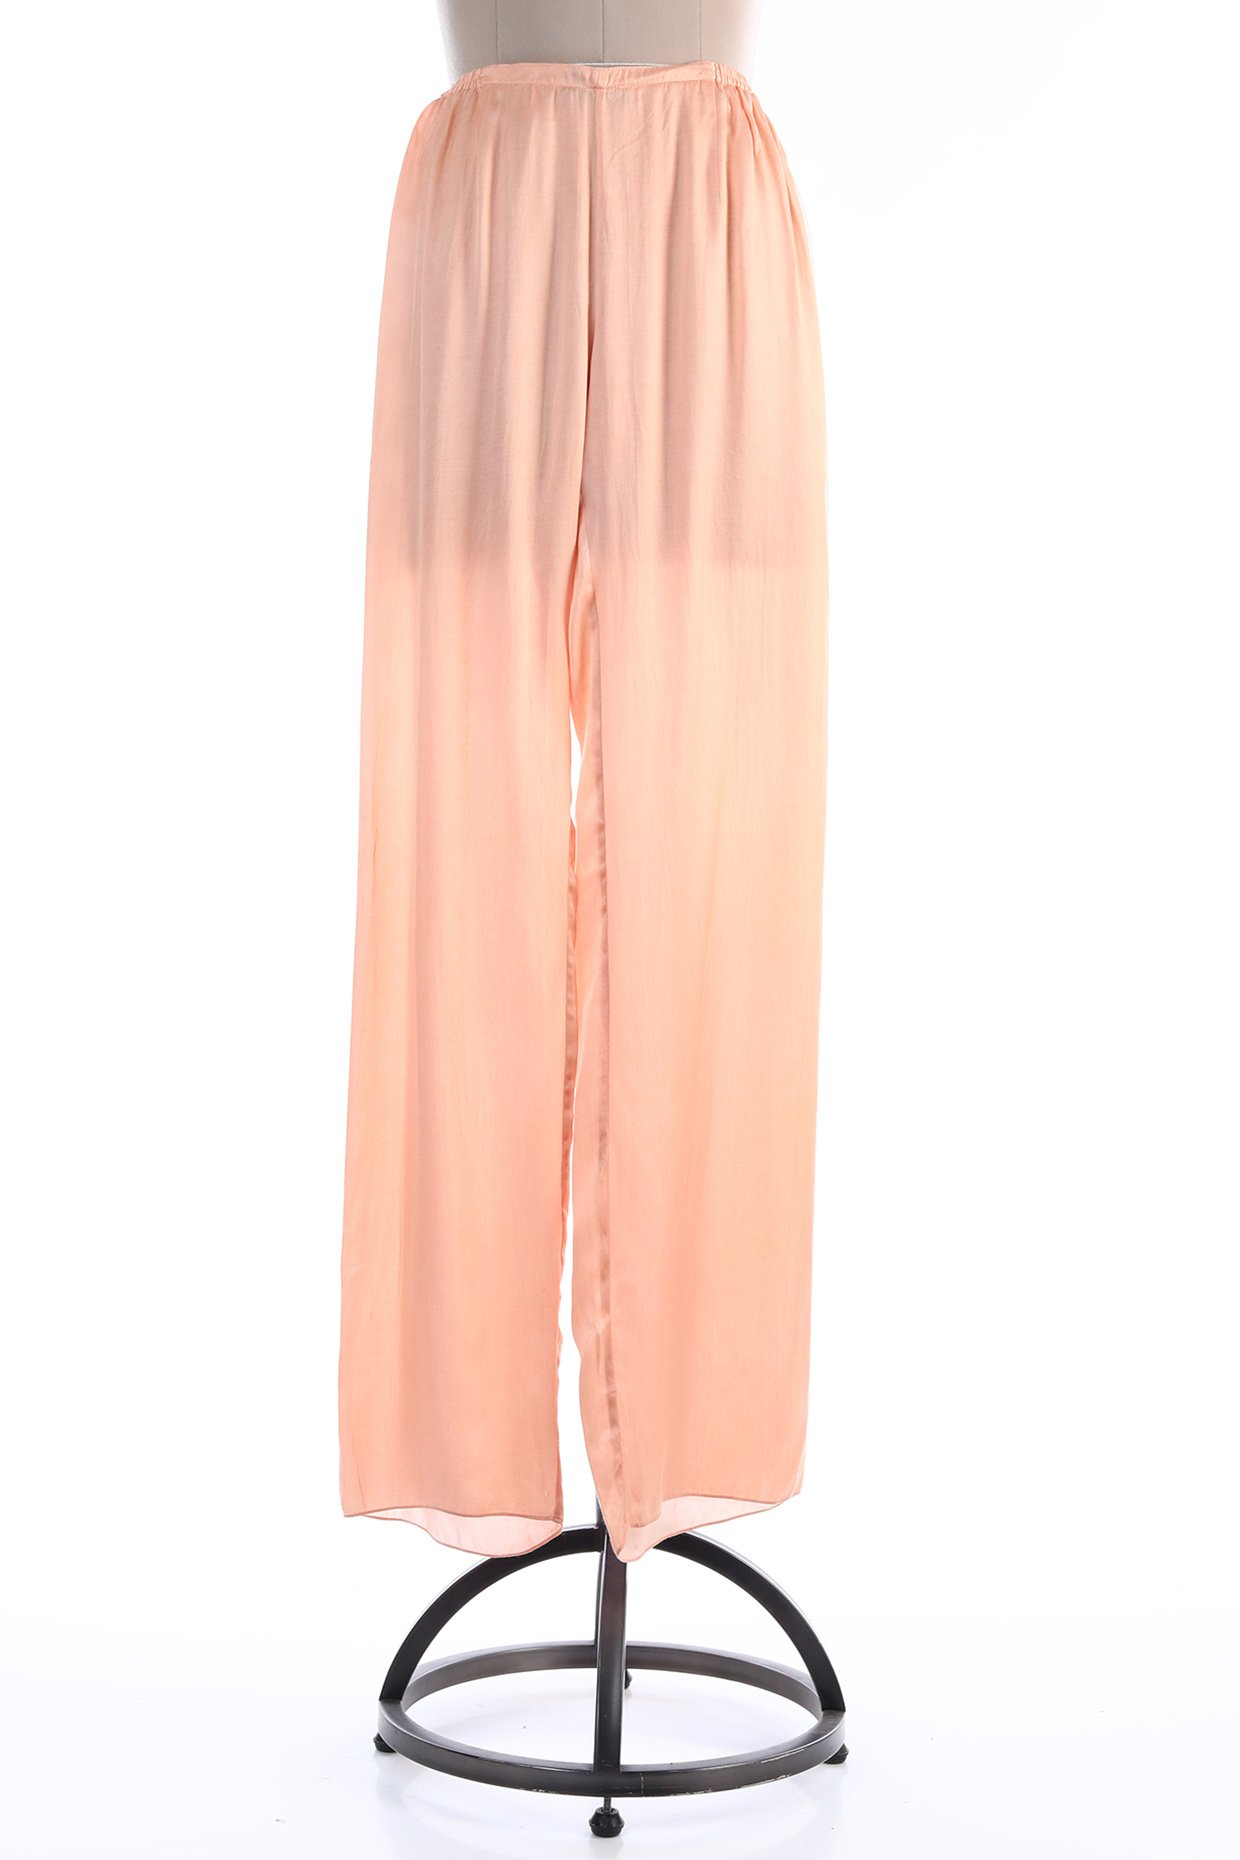 Ida Blush Satin Palazzo Trouser  Trousers  PrettylittleThing   liked  on Polyvore featuring pants pink tro  Satin trousers Palazzo trousers  Pink trousers